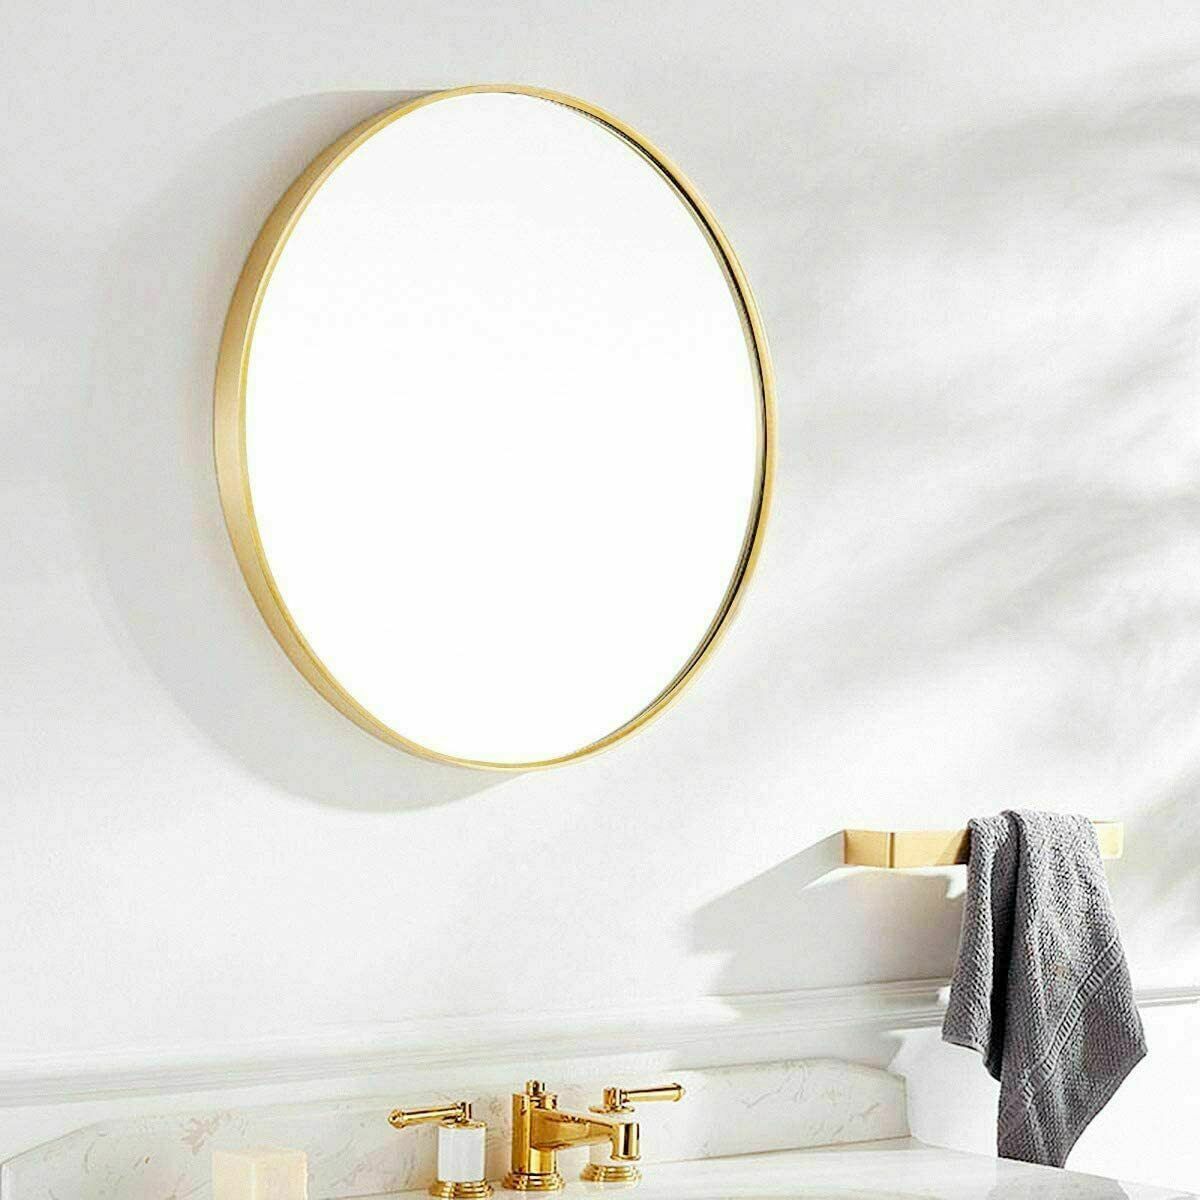 Primary image for TinyTimes 19.69" Modern Round Mirror, Accent Mirror, Gold Framed